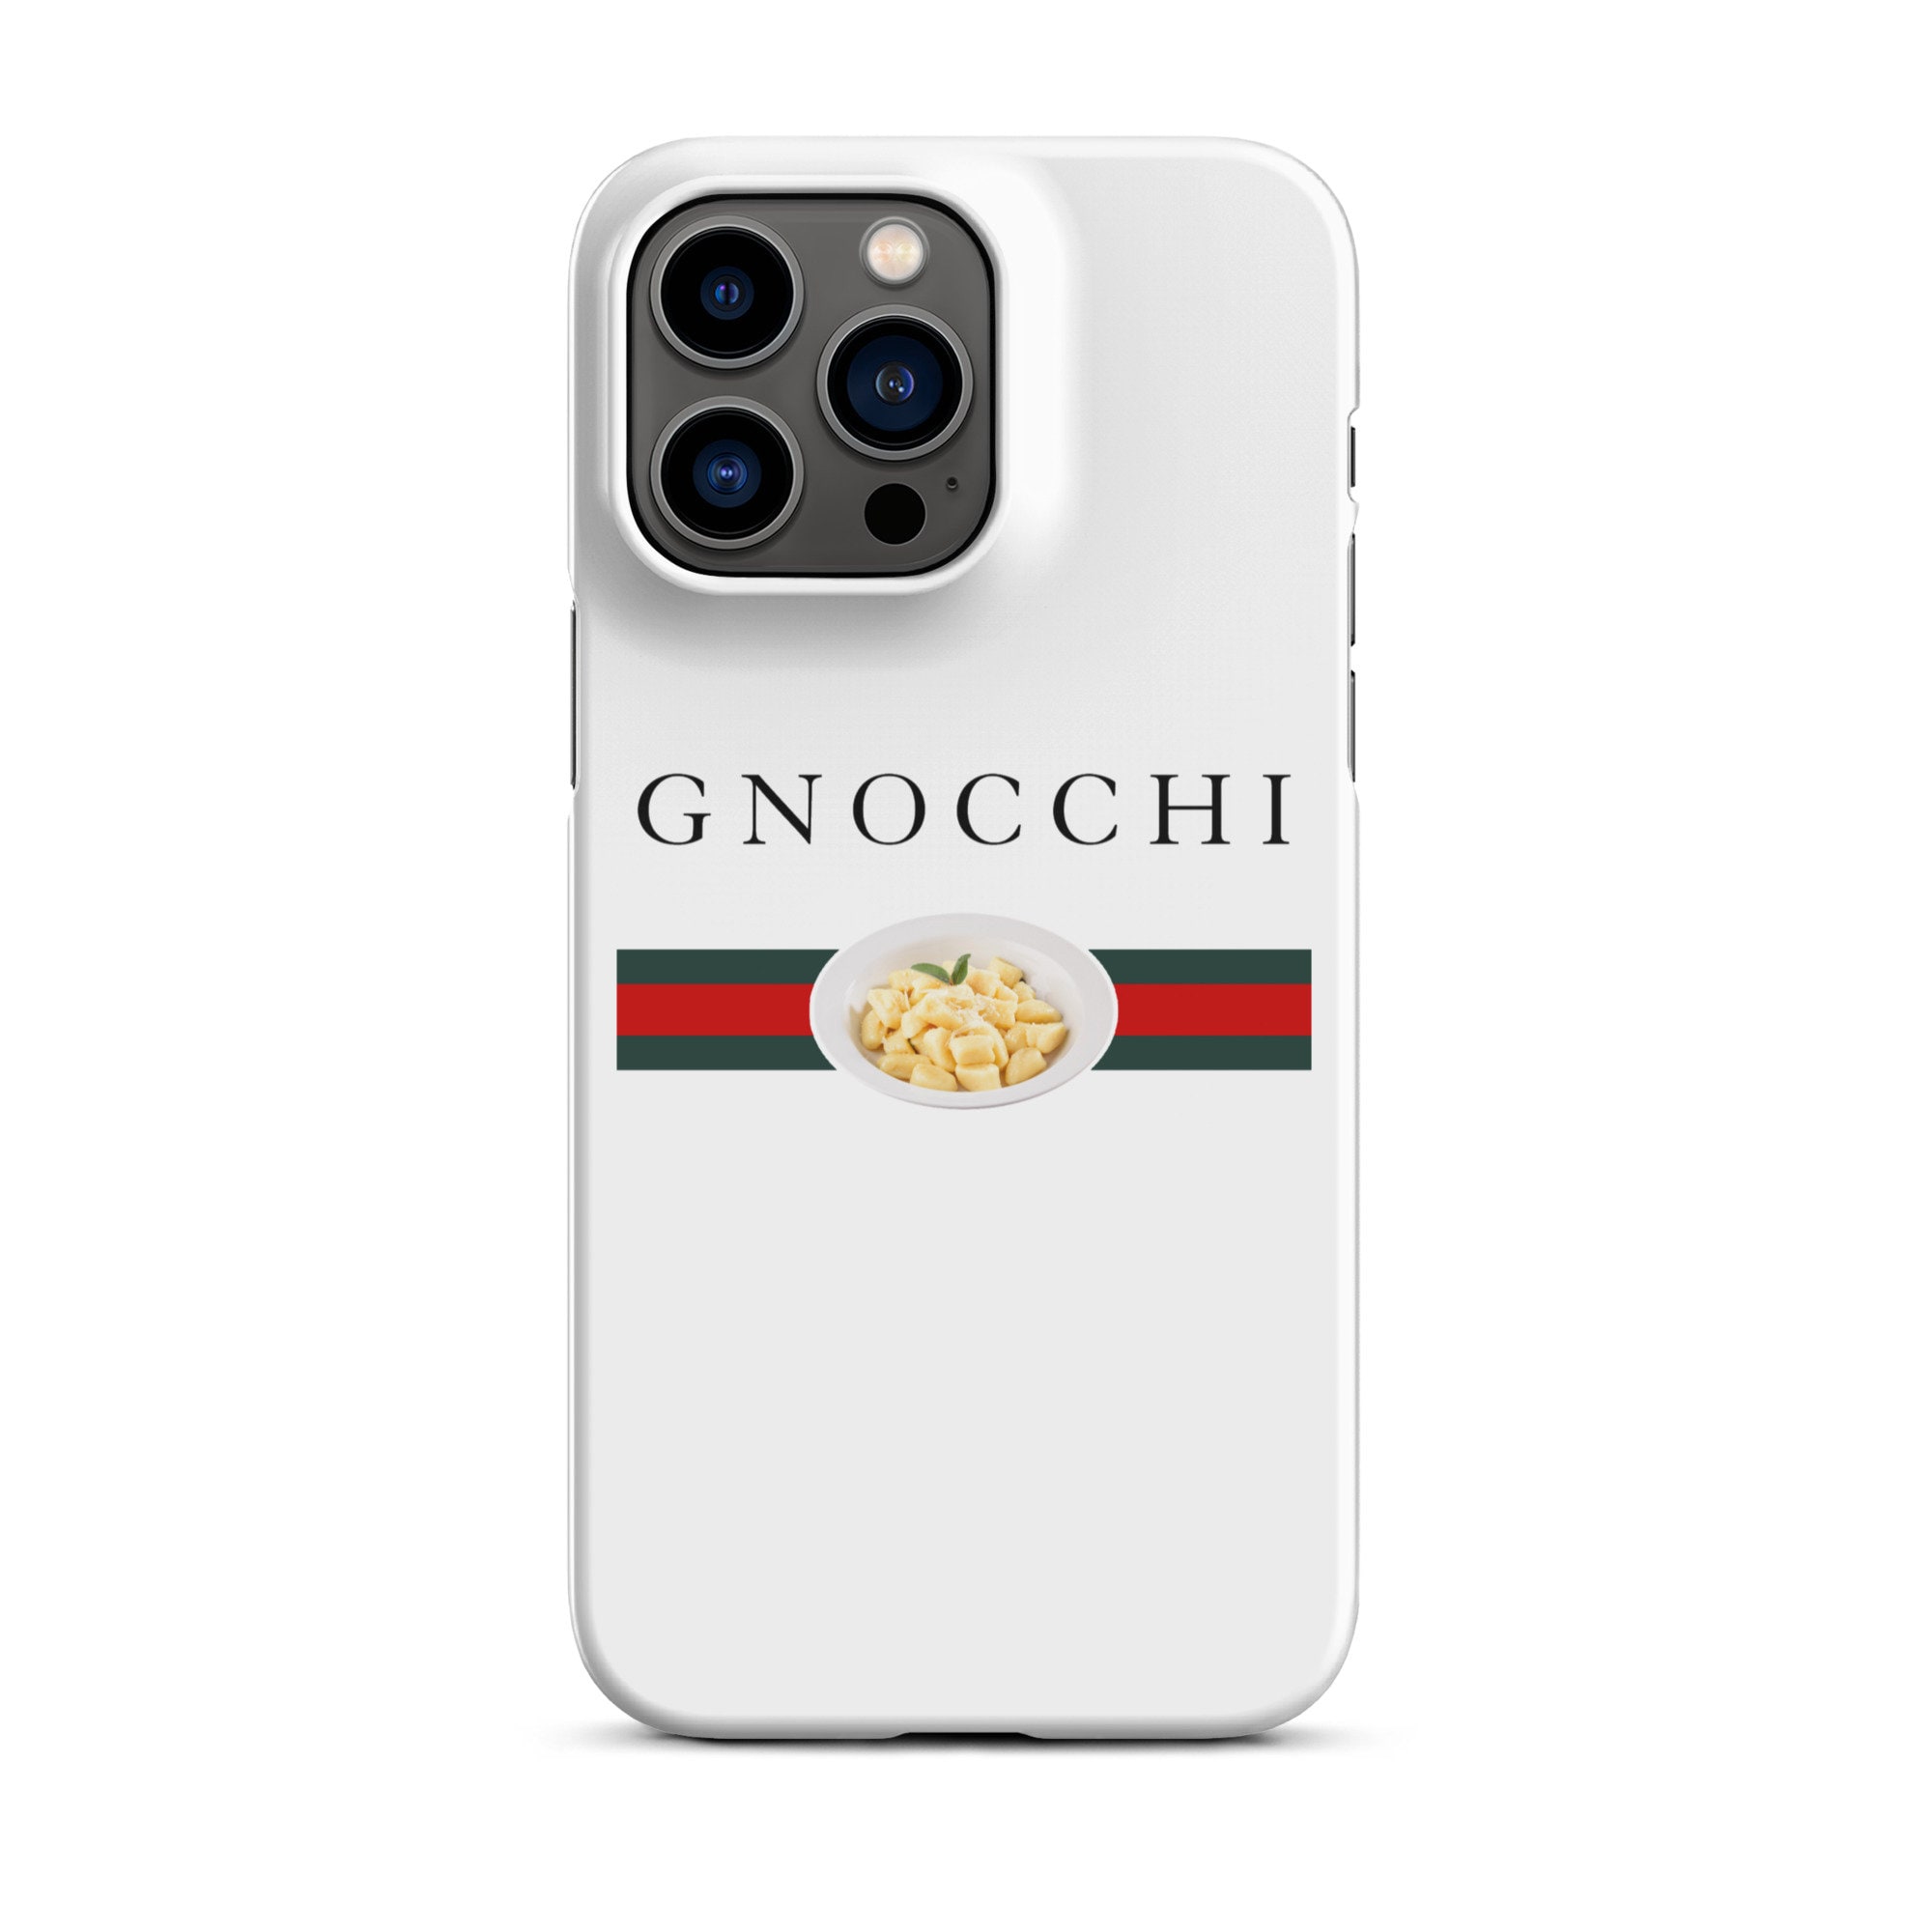 Gucci Iphone 7Max Case - Neutrals Phone Cases, Technology